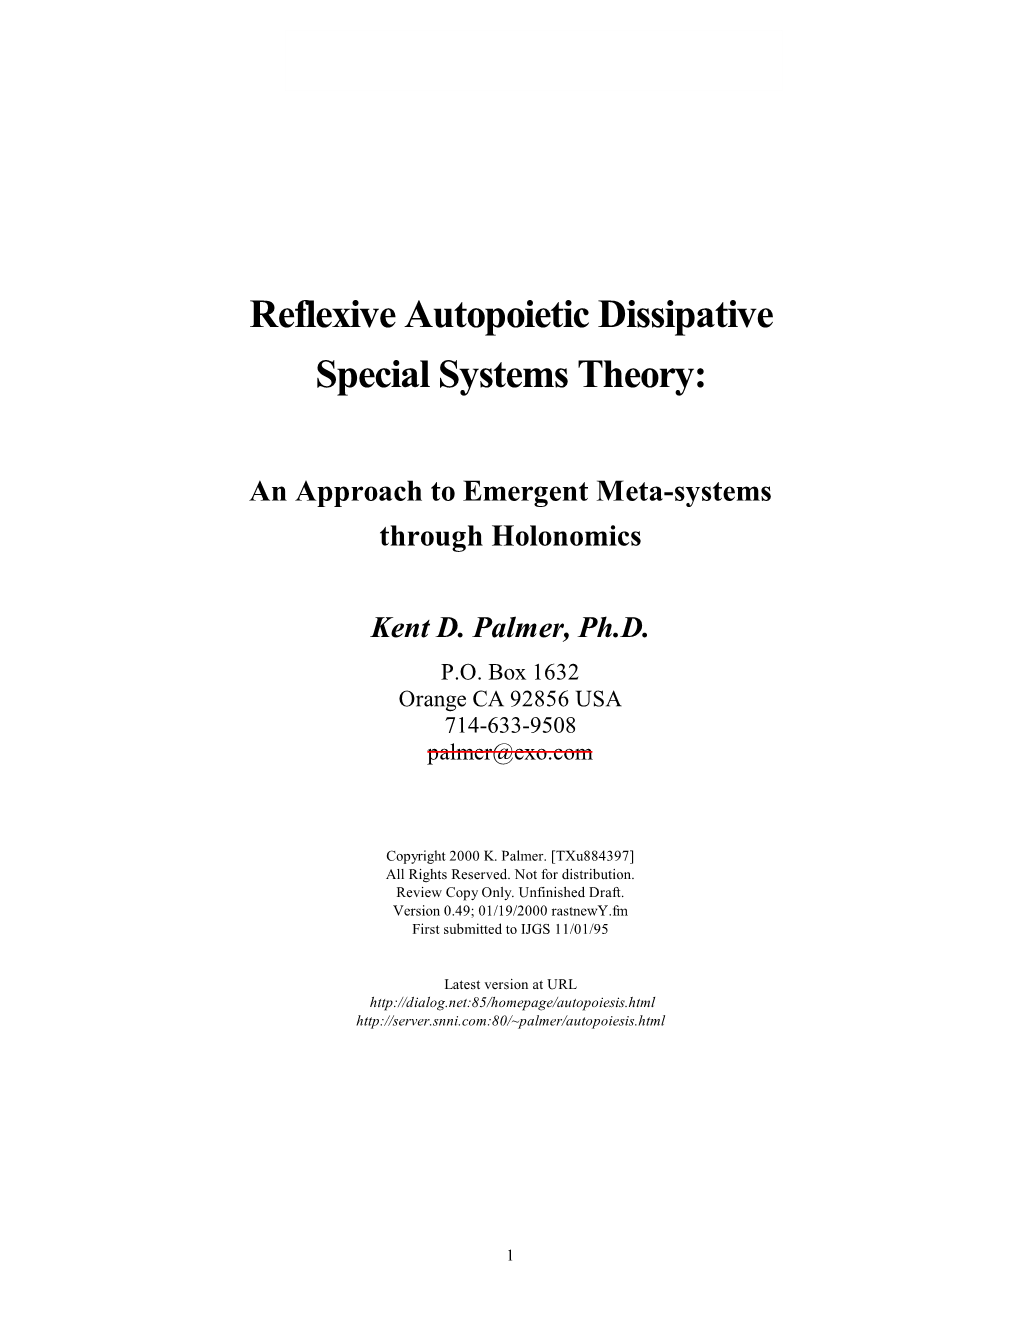 Reflexive Autopoietic Dissipative Special Systems Theory